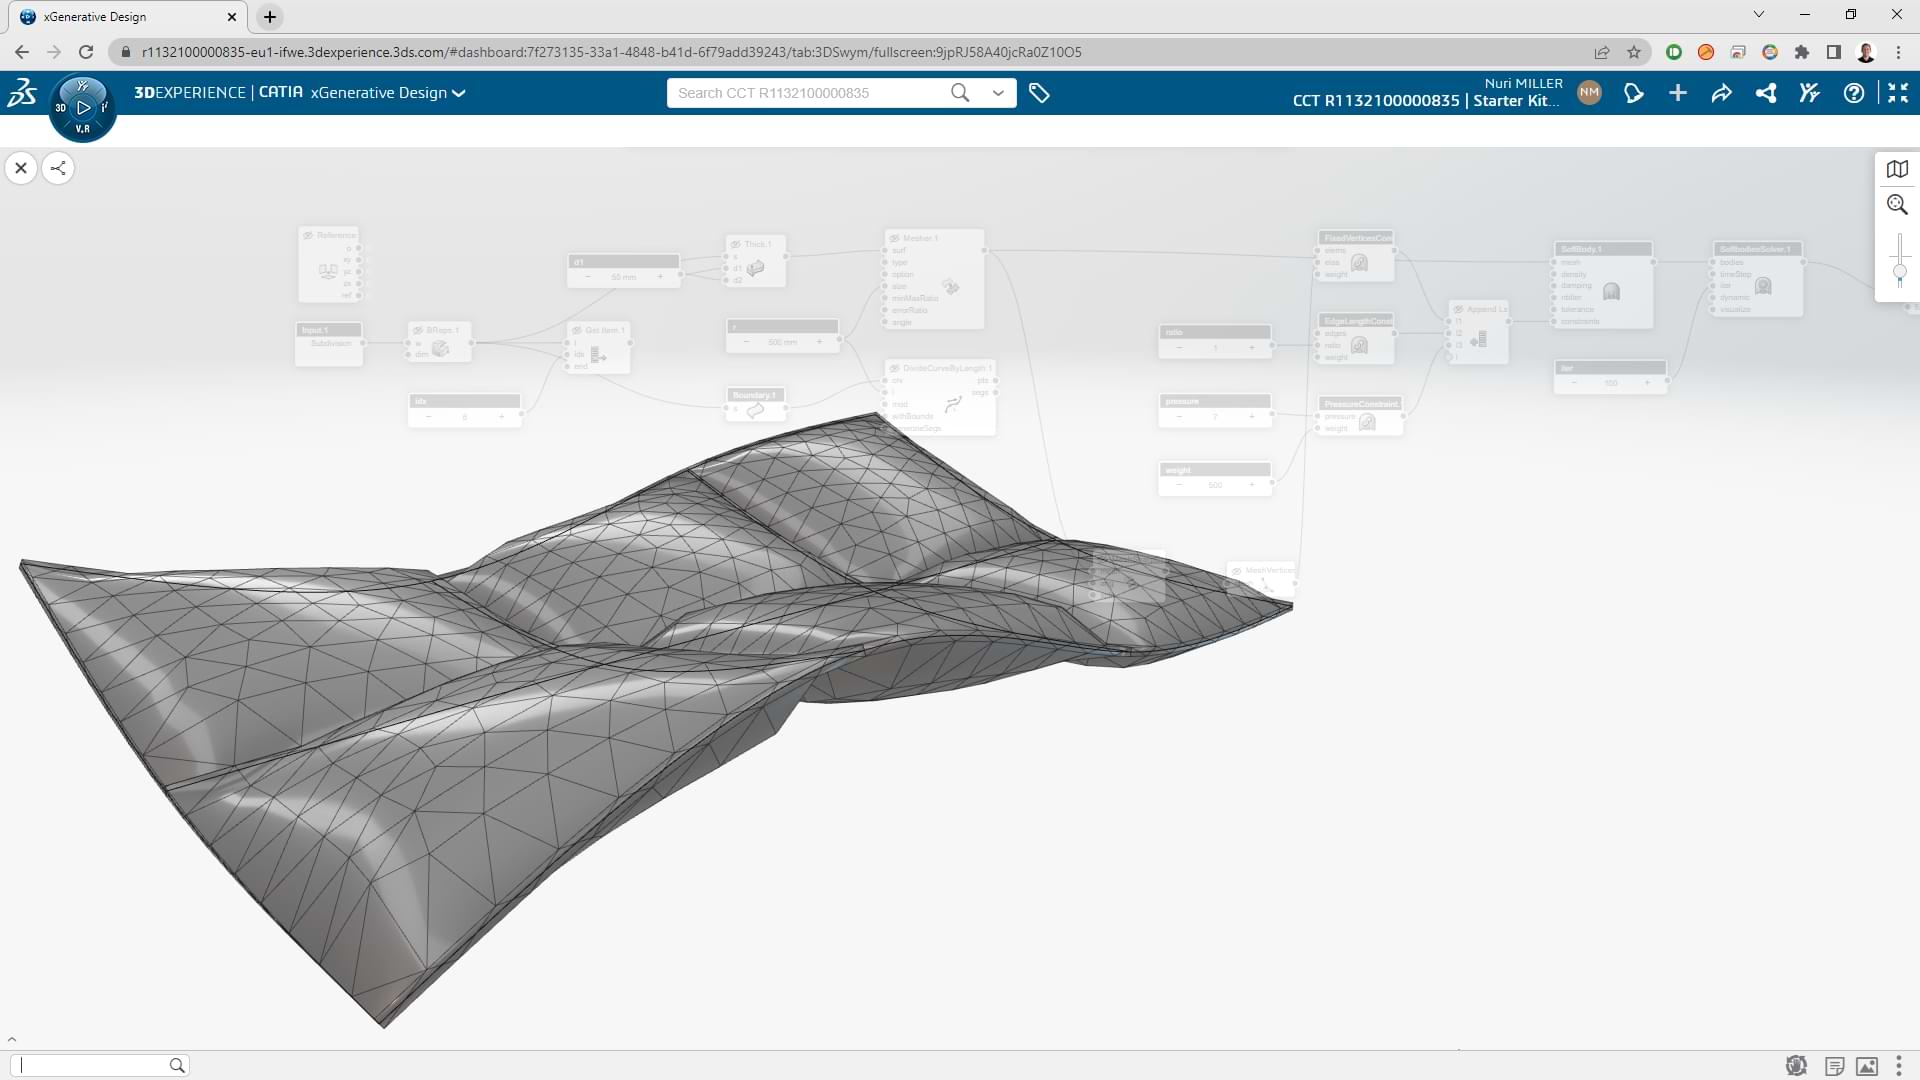 Cushion-like structure on the 3DEXPERIENCE platform - Dassault Systèmes